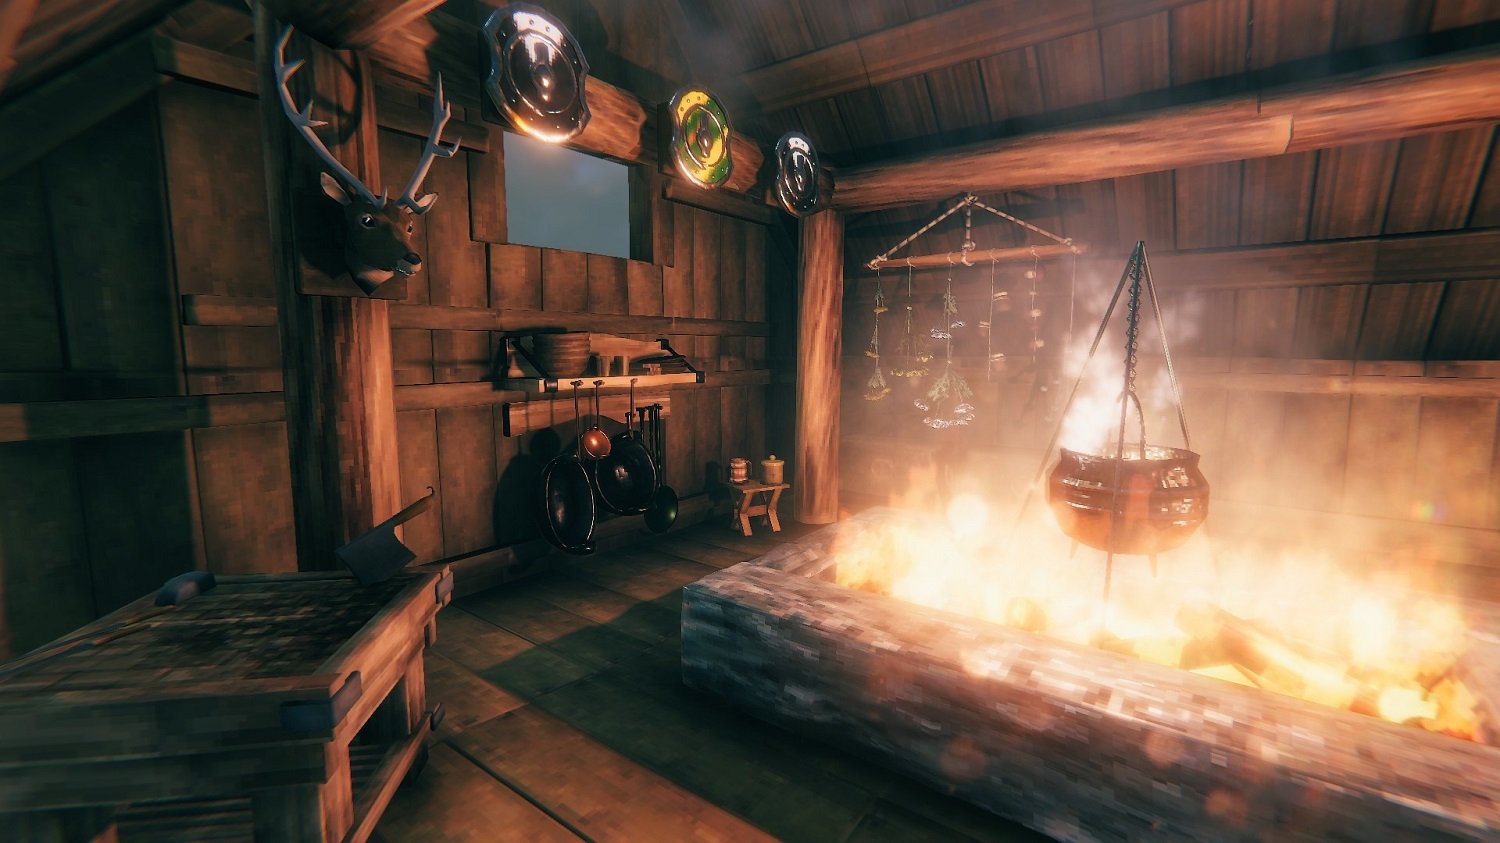 The Valheim Hearth and Home update will include new cooking stations, courtesy of Iron Gate